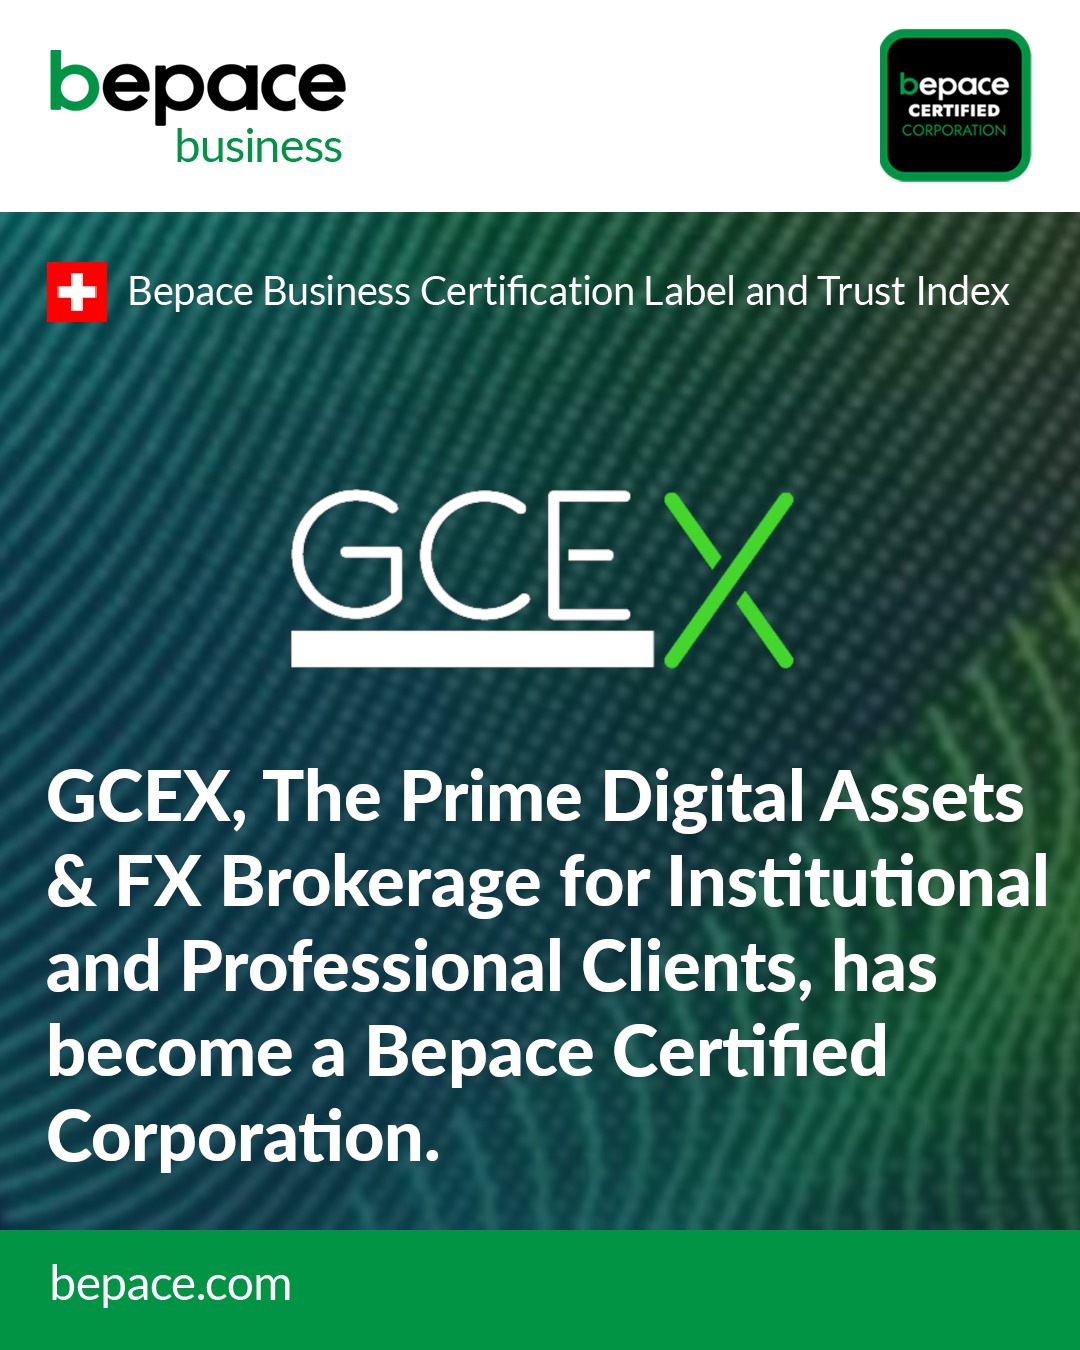 GCEX is now a Bepace Certified Corporation